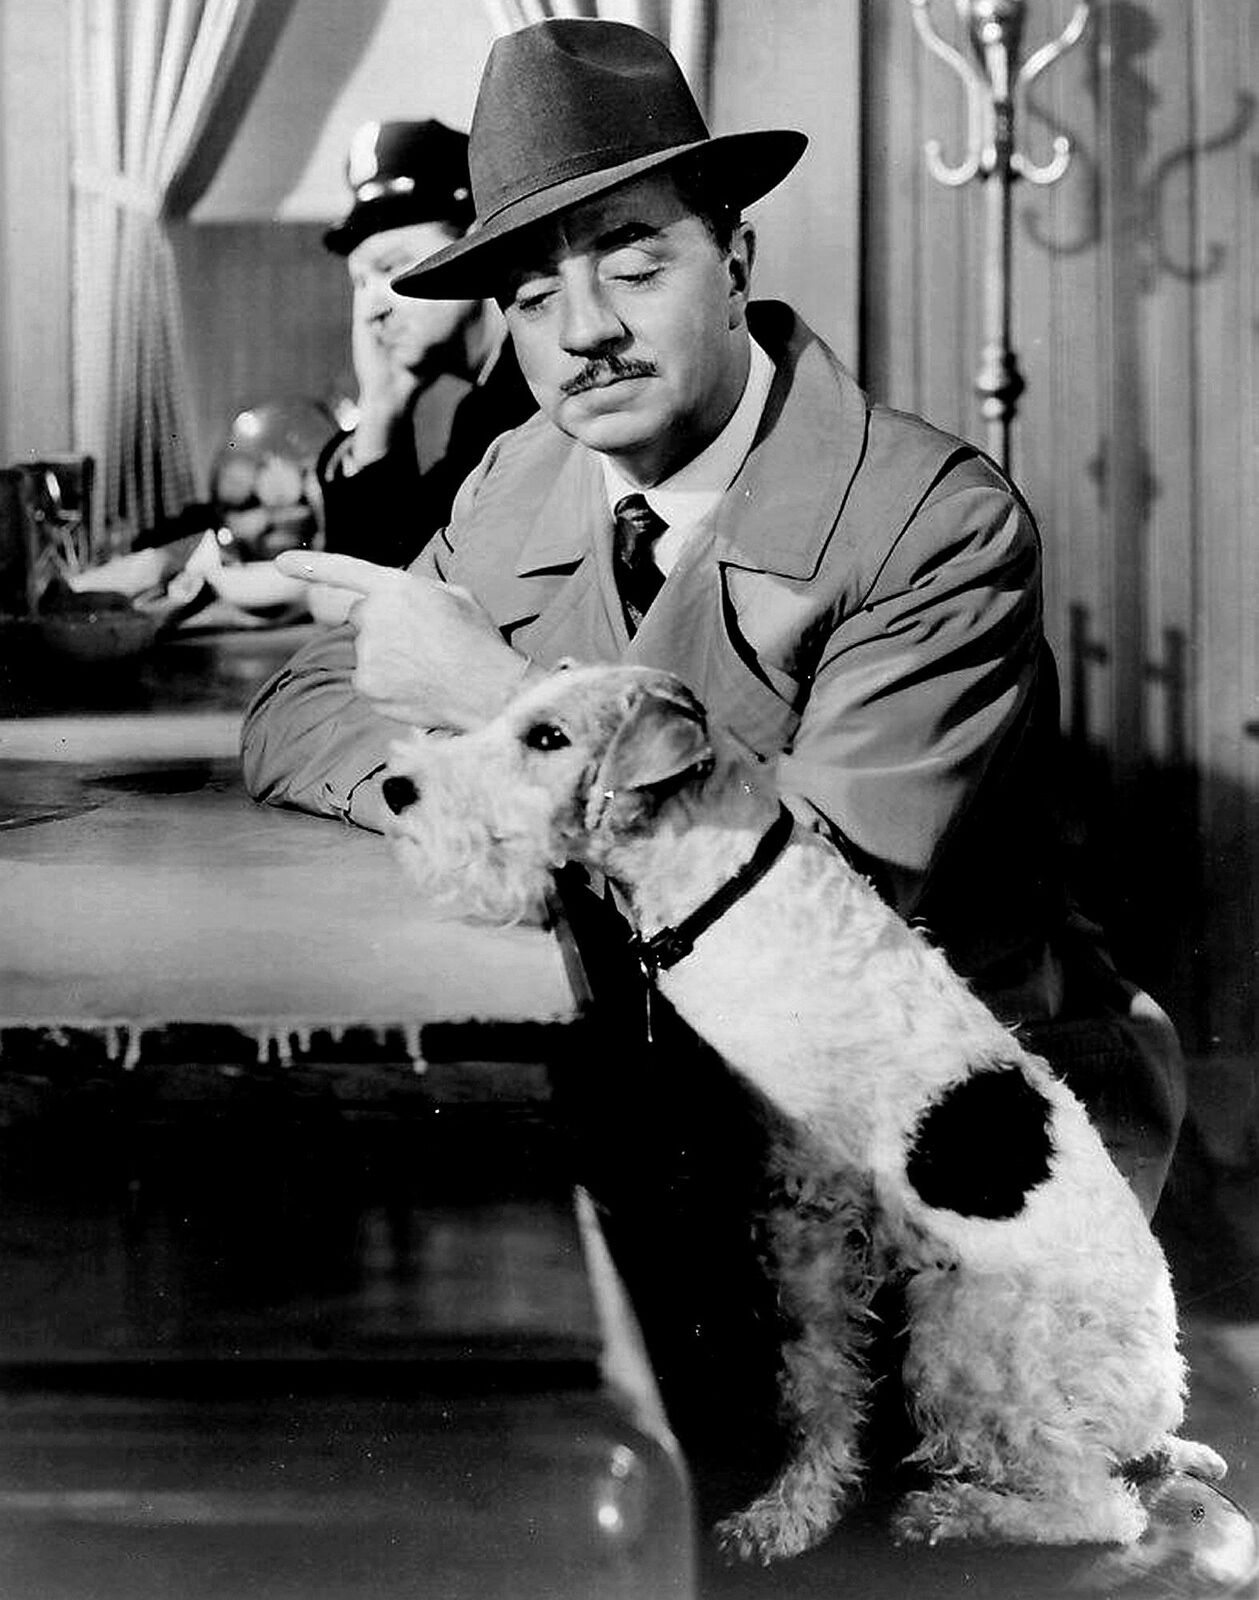 1947 WILLIAM POWELL with Terrier Dog in SONG OF THE THIN MAN Photo (189-w )